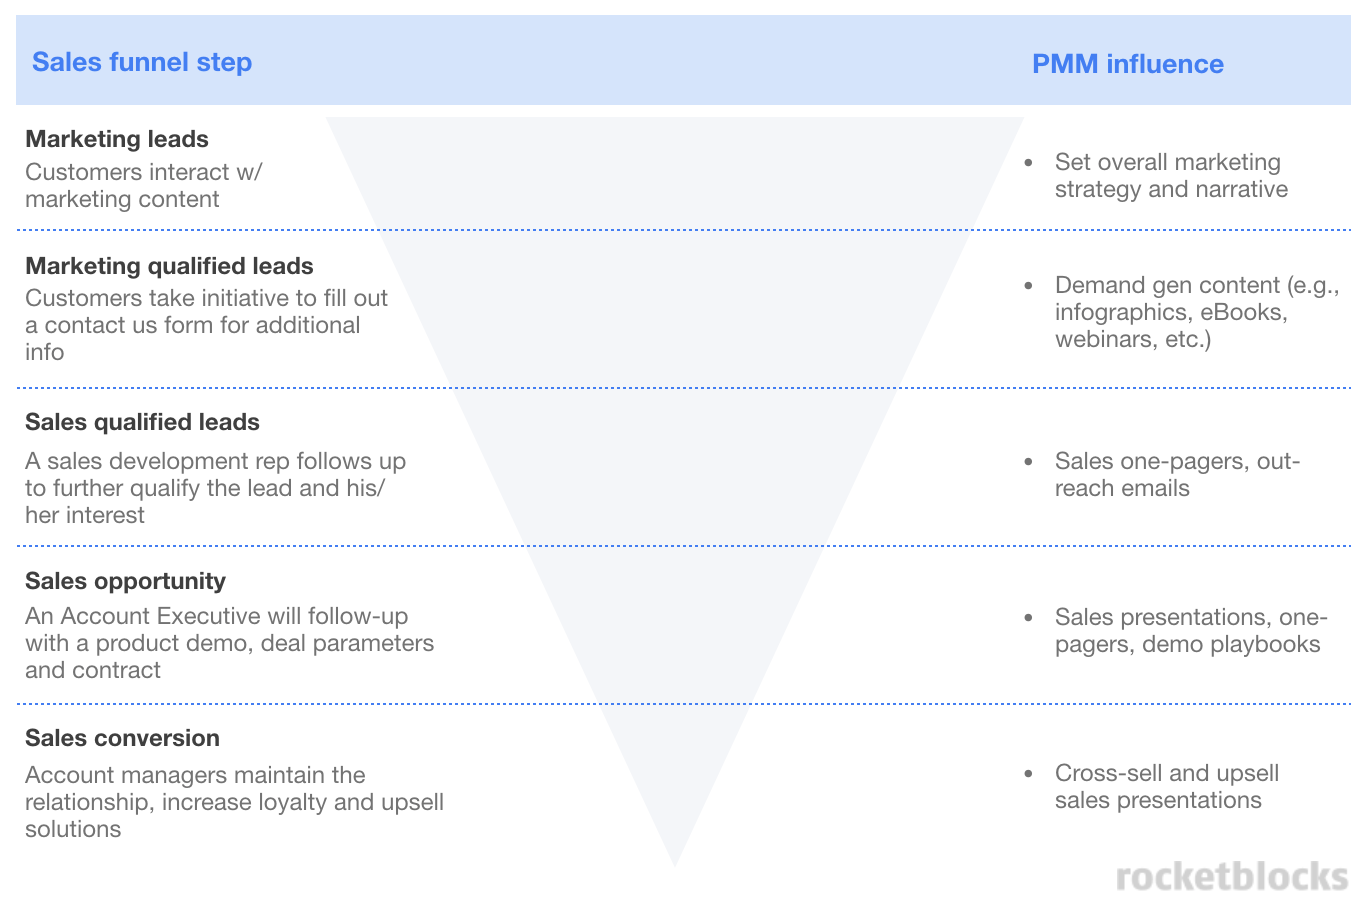 How PMMs influence the sales funnel at different stages.